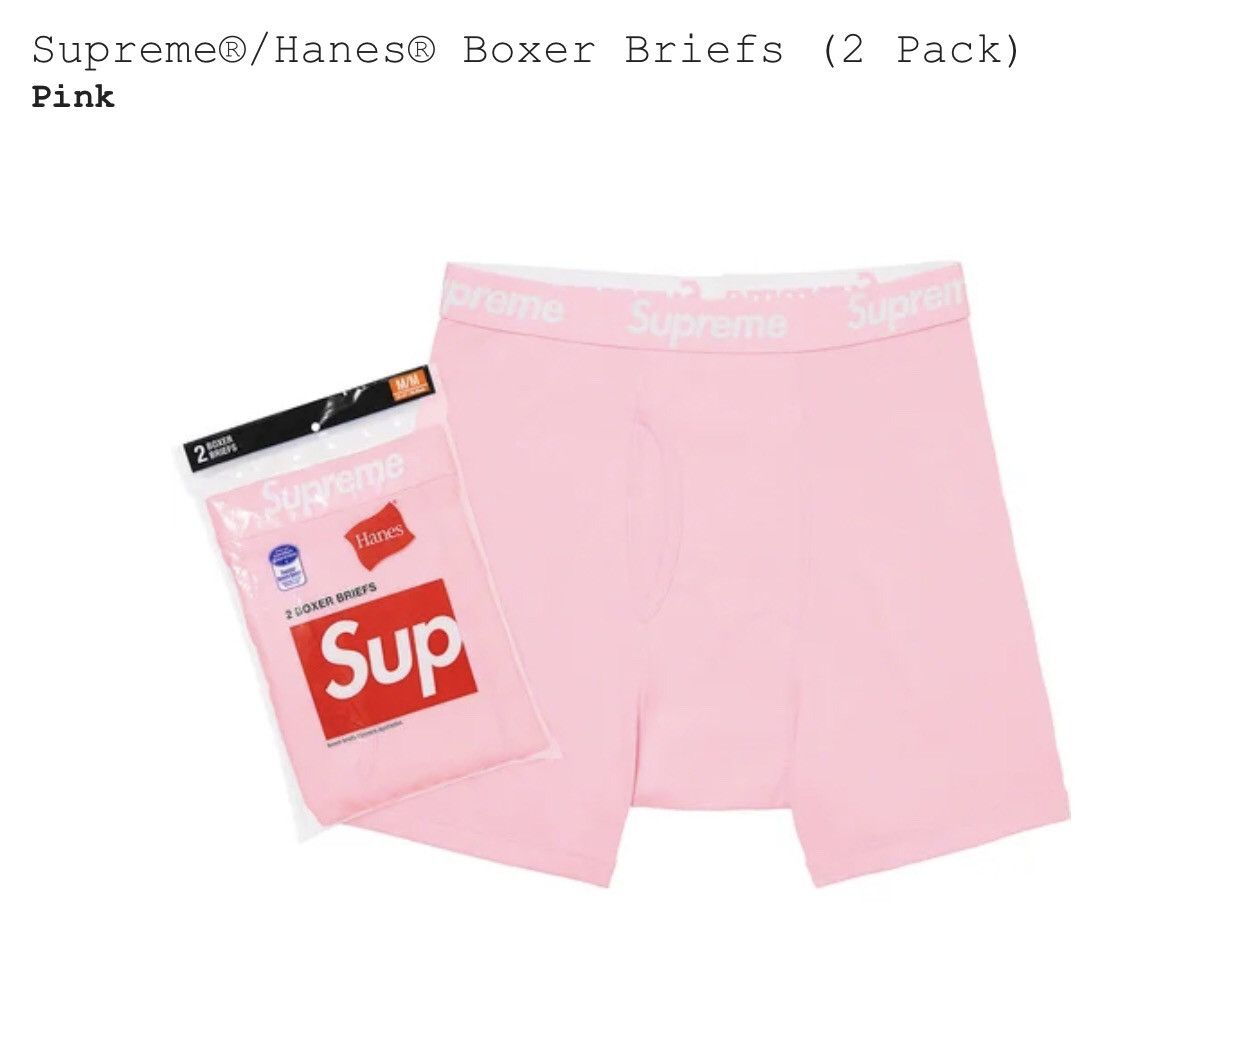 Supreme (28-30) Supreme Hanes Boxer Briefs Pink FW21 (2 Pack) Size 30 - 6 Preview